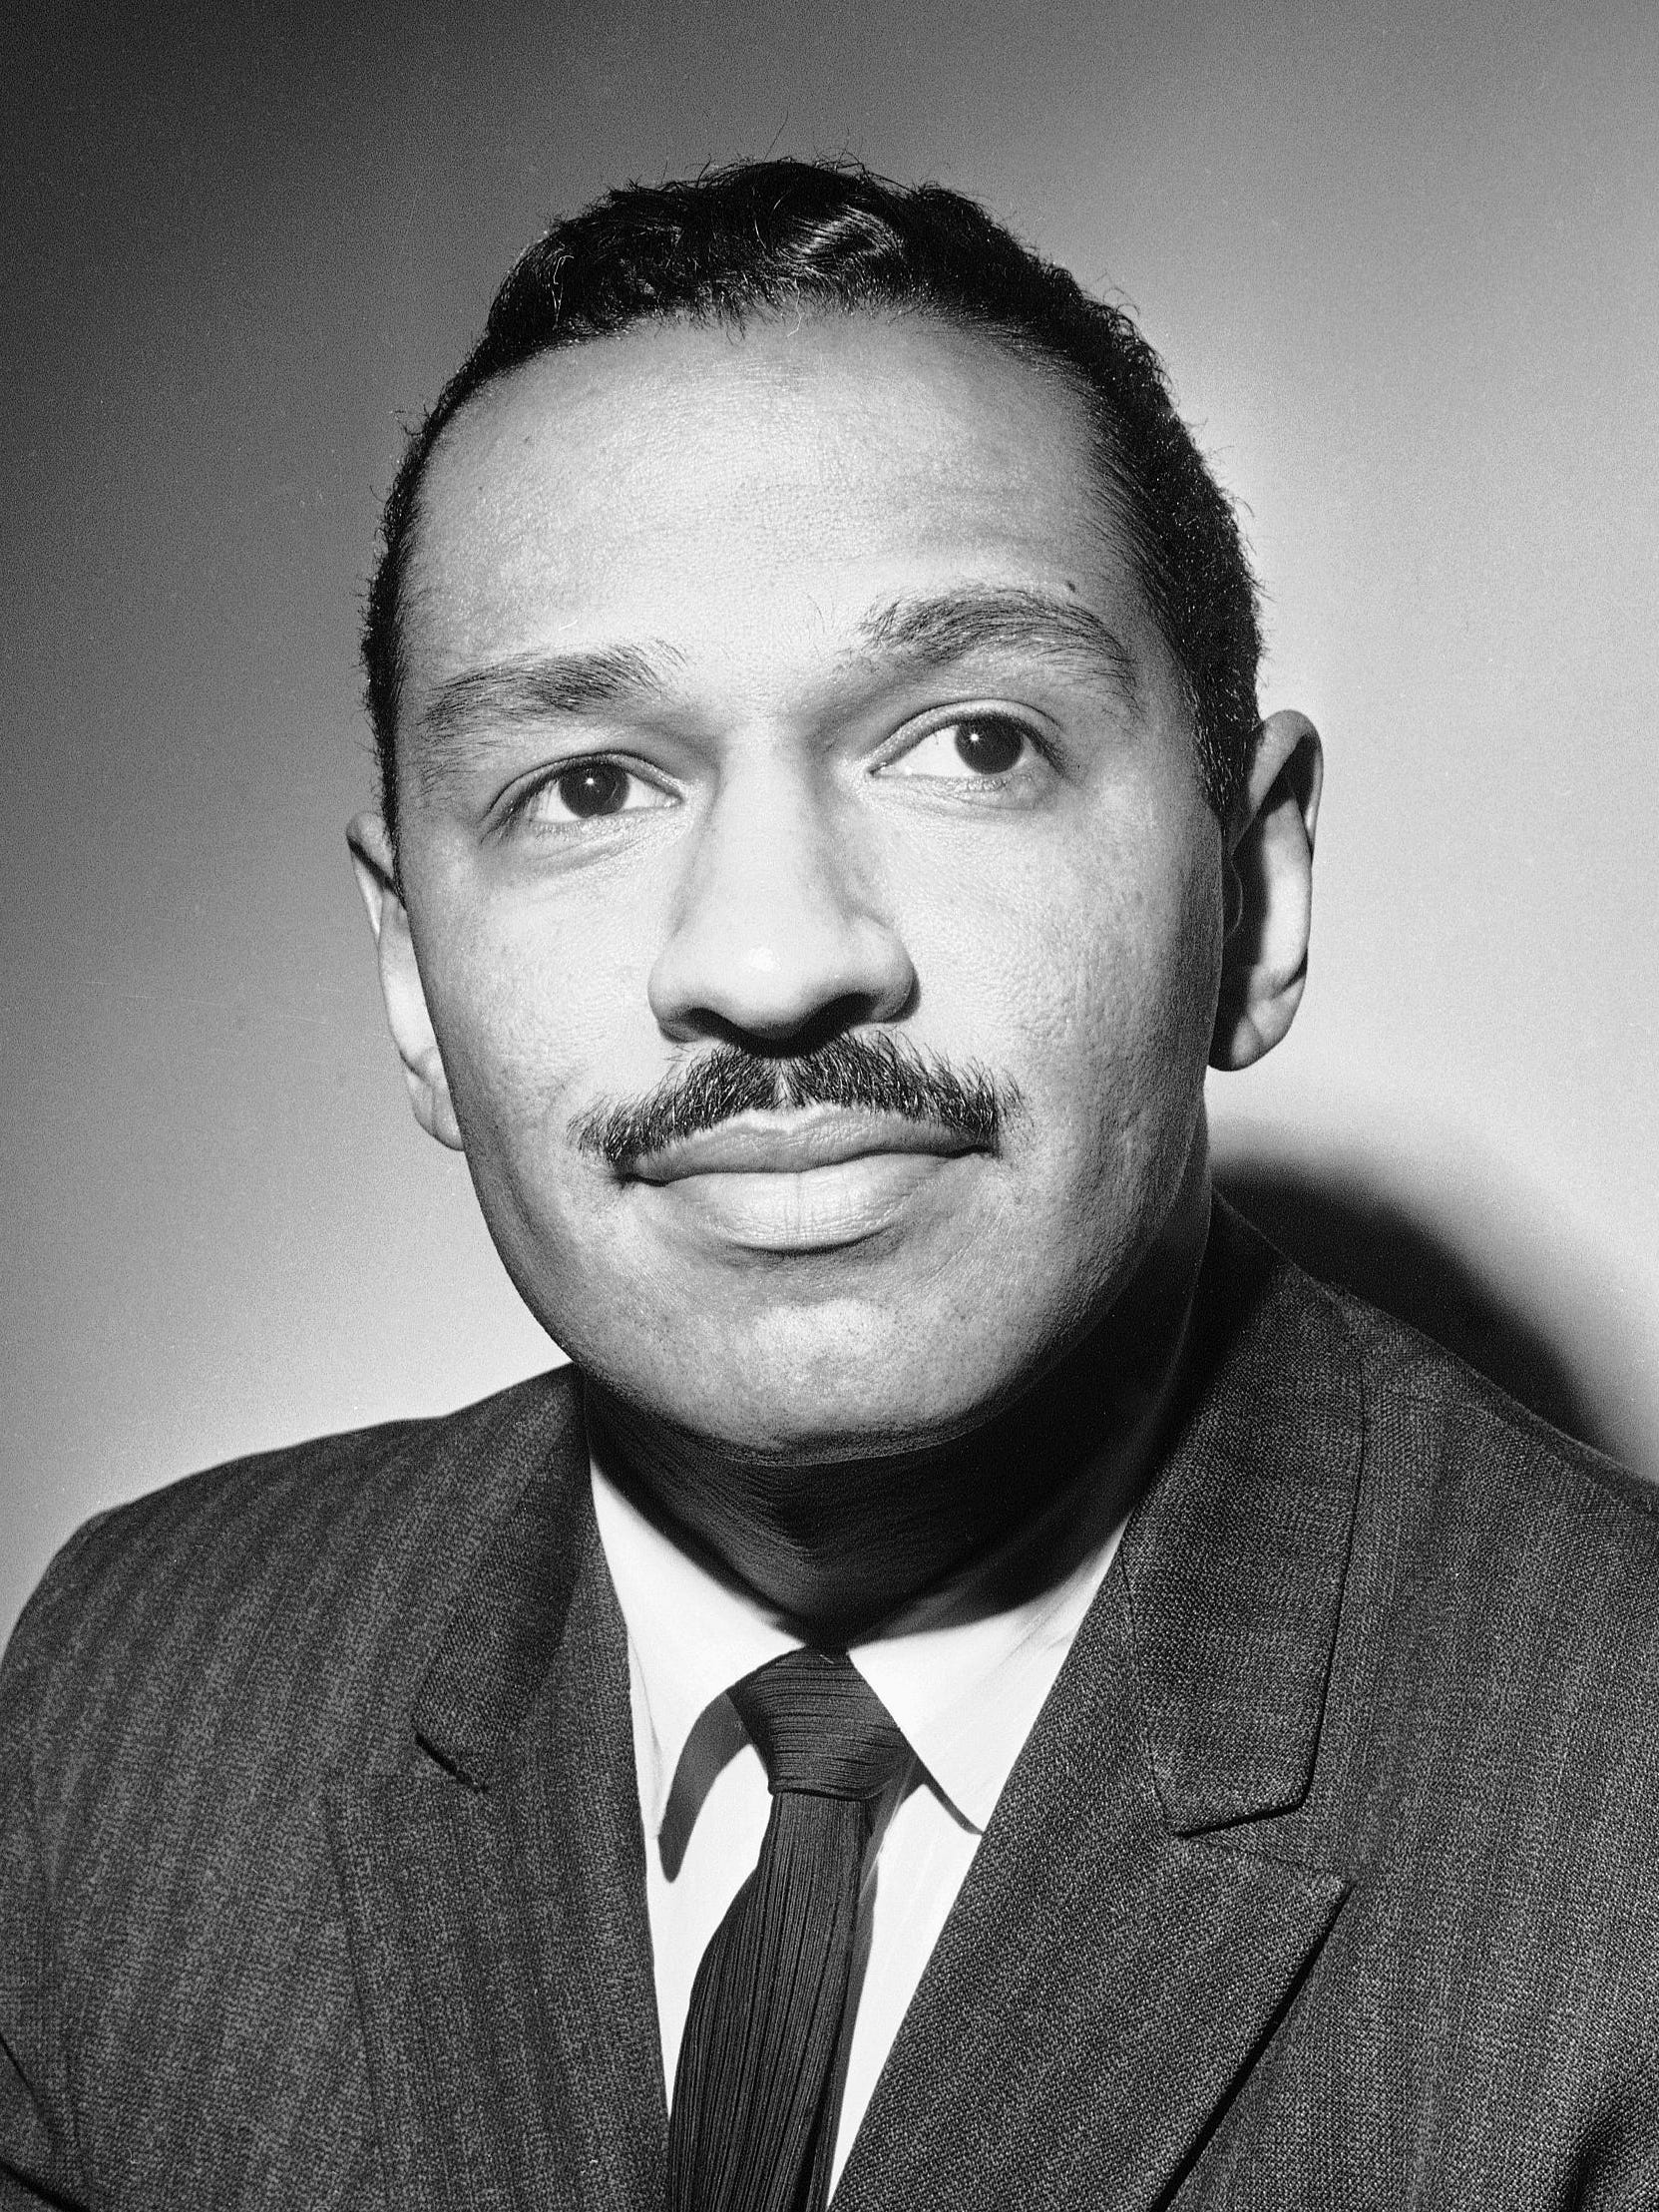 The son of a  Detroit labor leader, John Conyers Jr. served in the Korean War as an officer in the U.S. Army Corps of Engineers. After getting a law degree, in 1964 he ran for the U.S House of Representatives in what was then Michigan's 1st District, winning the seat with 84 percent of the vote.